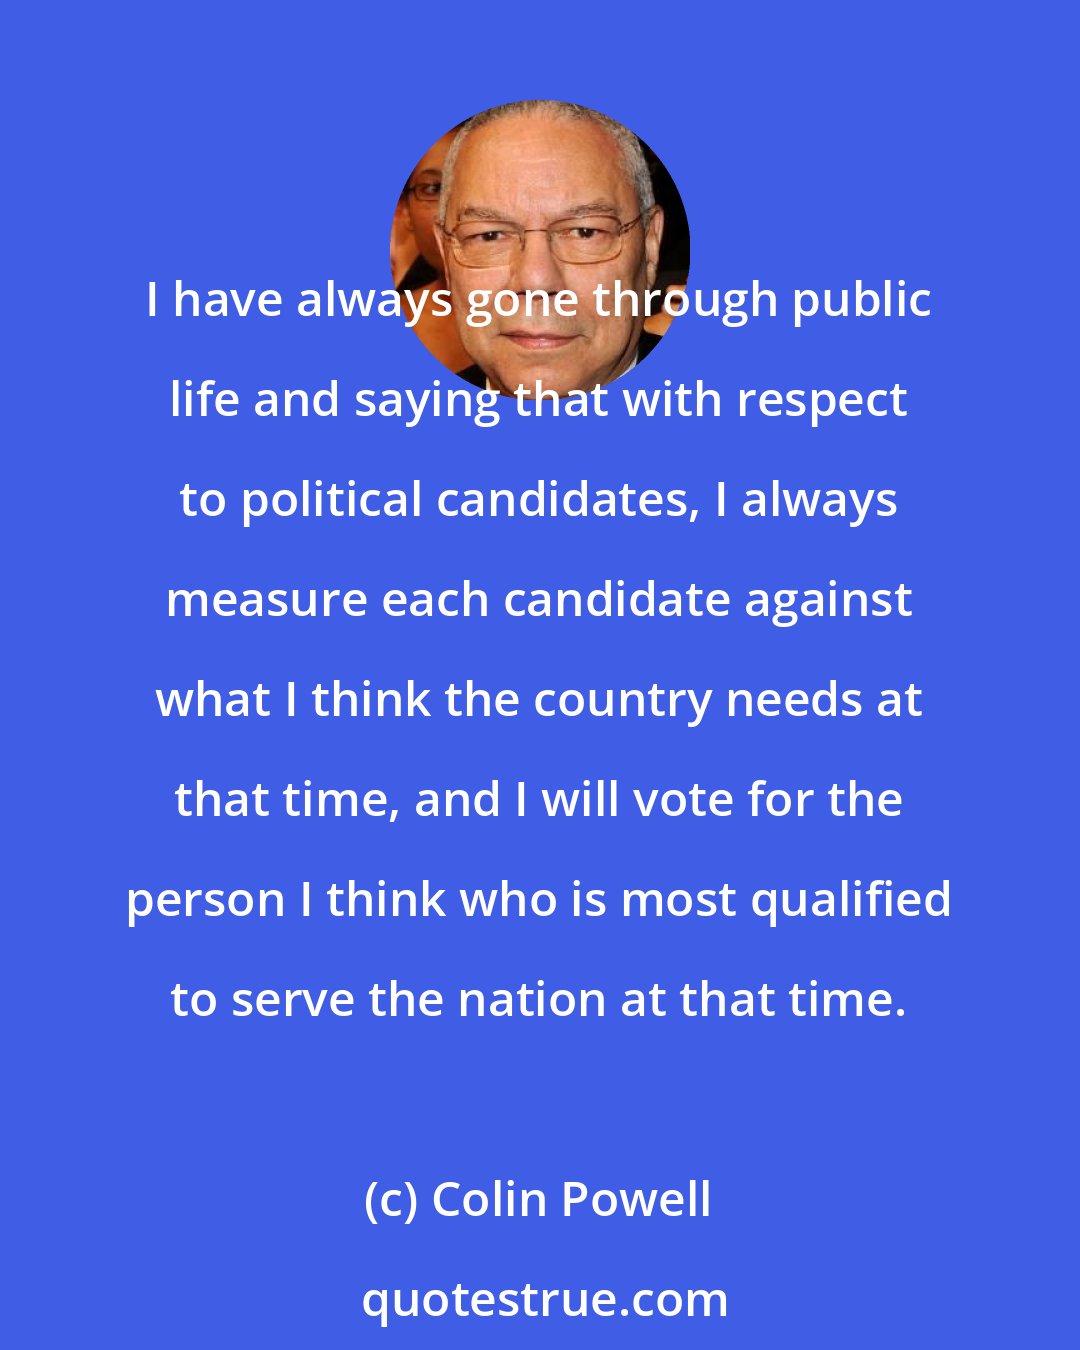 Colin Powell: I have always gone through public life and saying that with respect to political candidates, I always measure each candidate against what I think the country needs at that time, and I will vote for the person I think who is most qualified to serve the nation at that time.